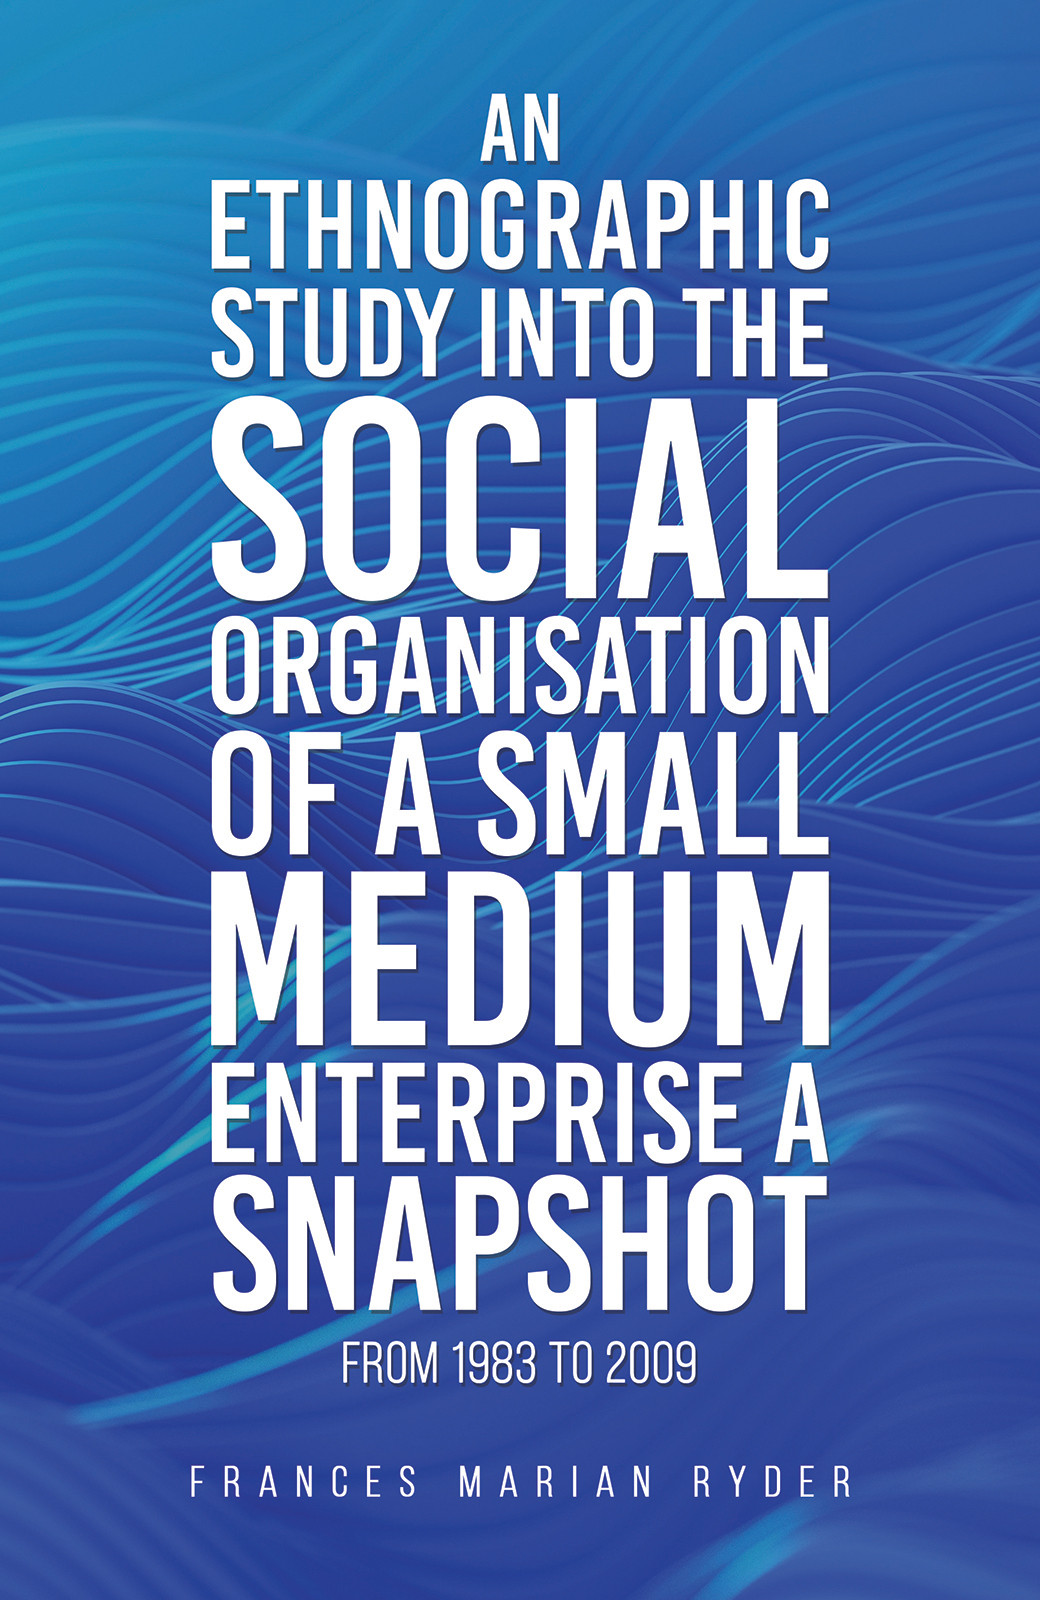 An Ethnographic Study into the Social Organisation of a Small Medium Enterprise a Snapshot from 1983 to 2009-bookcover